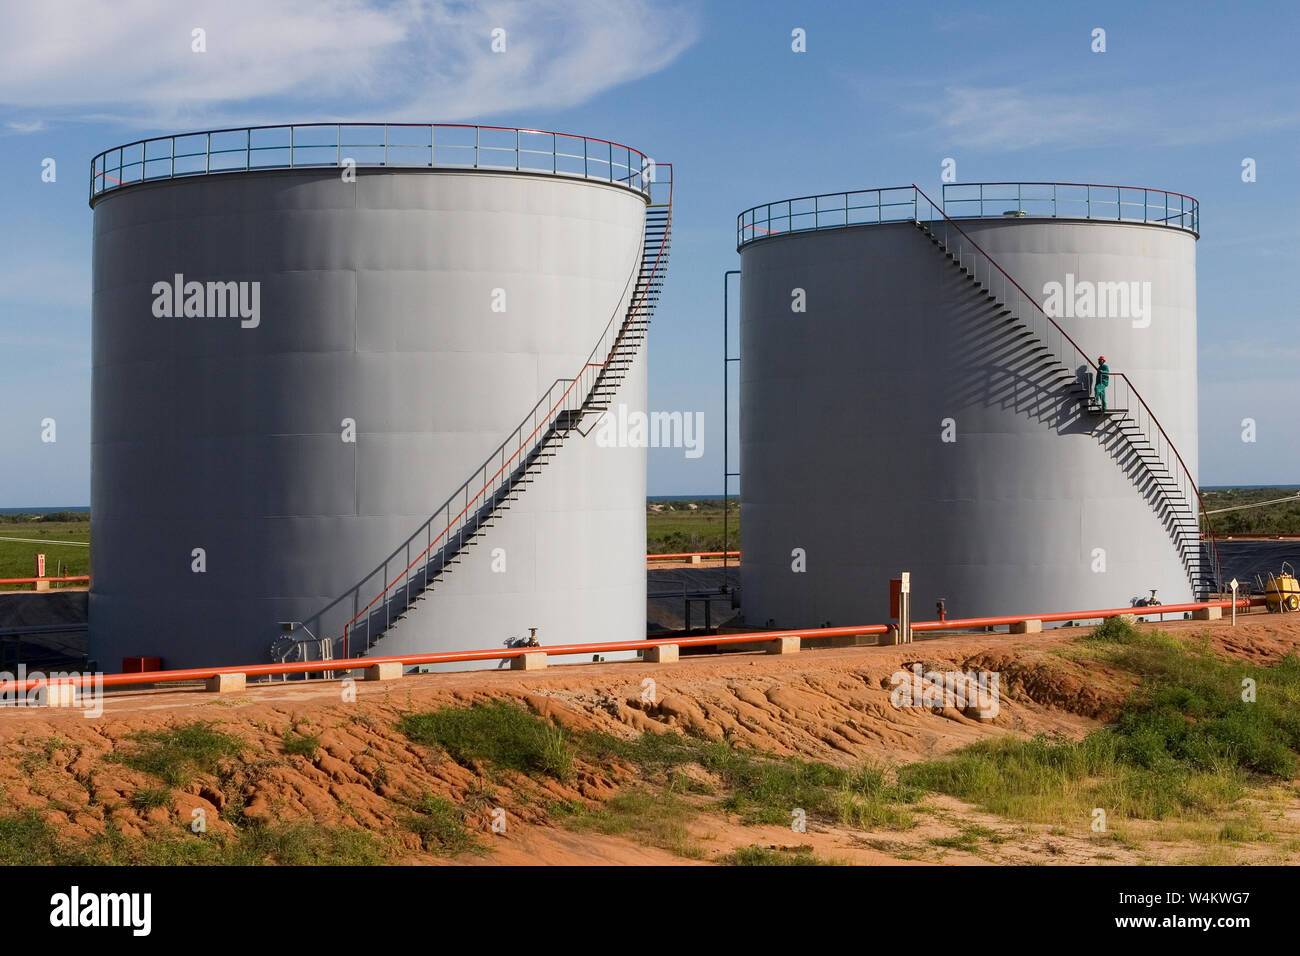 Mining, managing & transporting of titanium mineral sands. Oil storage tanks providing fuel for mine, site, port facilities and shipping. Stock Photo